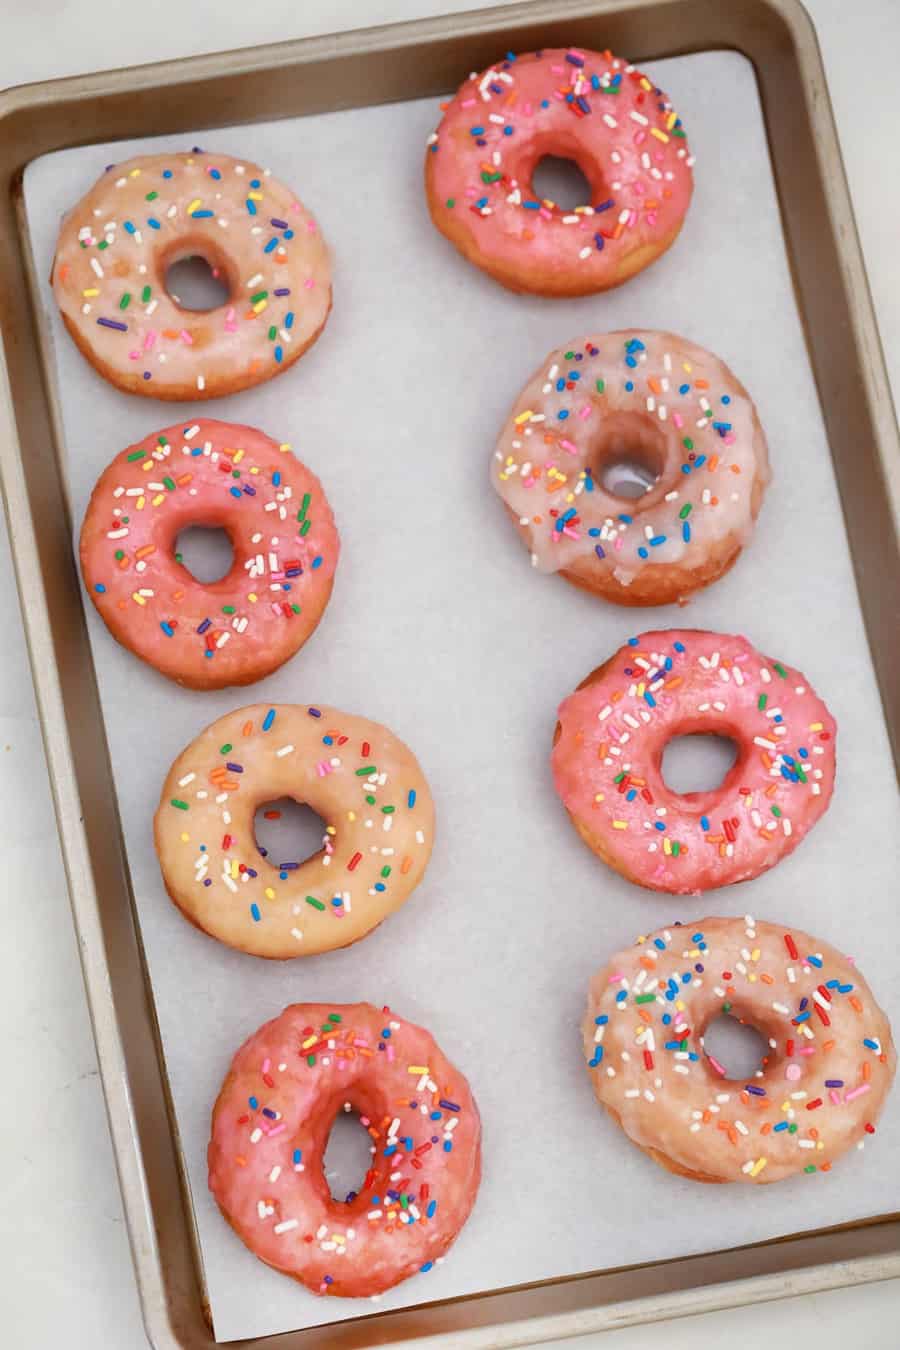 Donuts made from biscuit dough